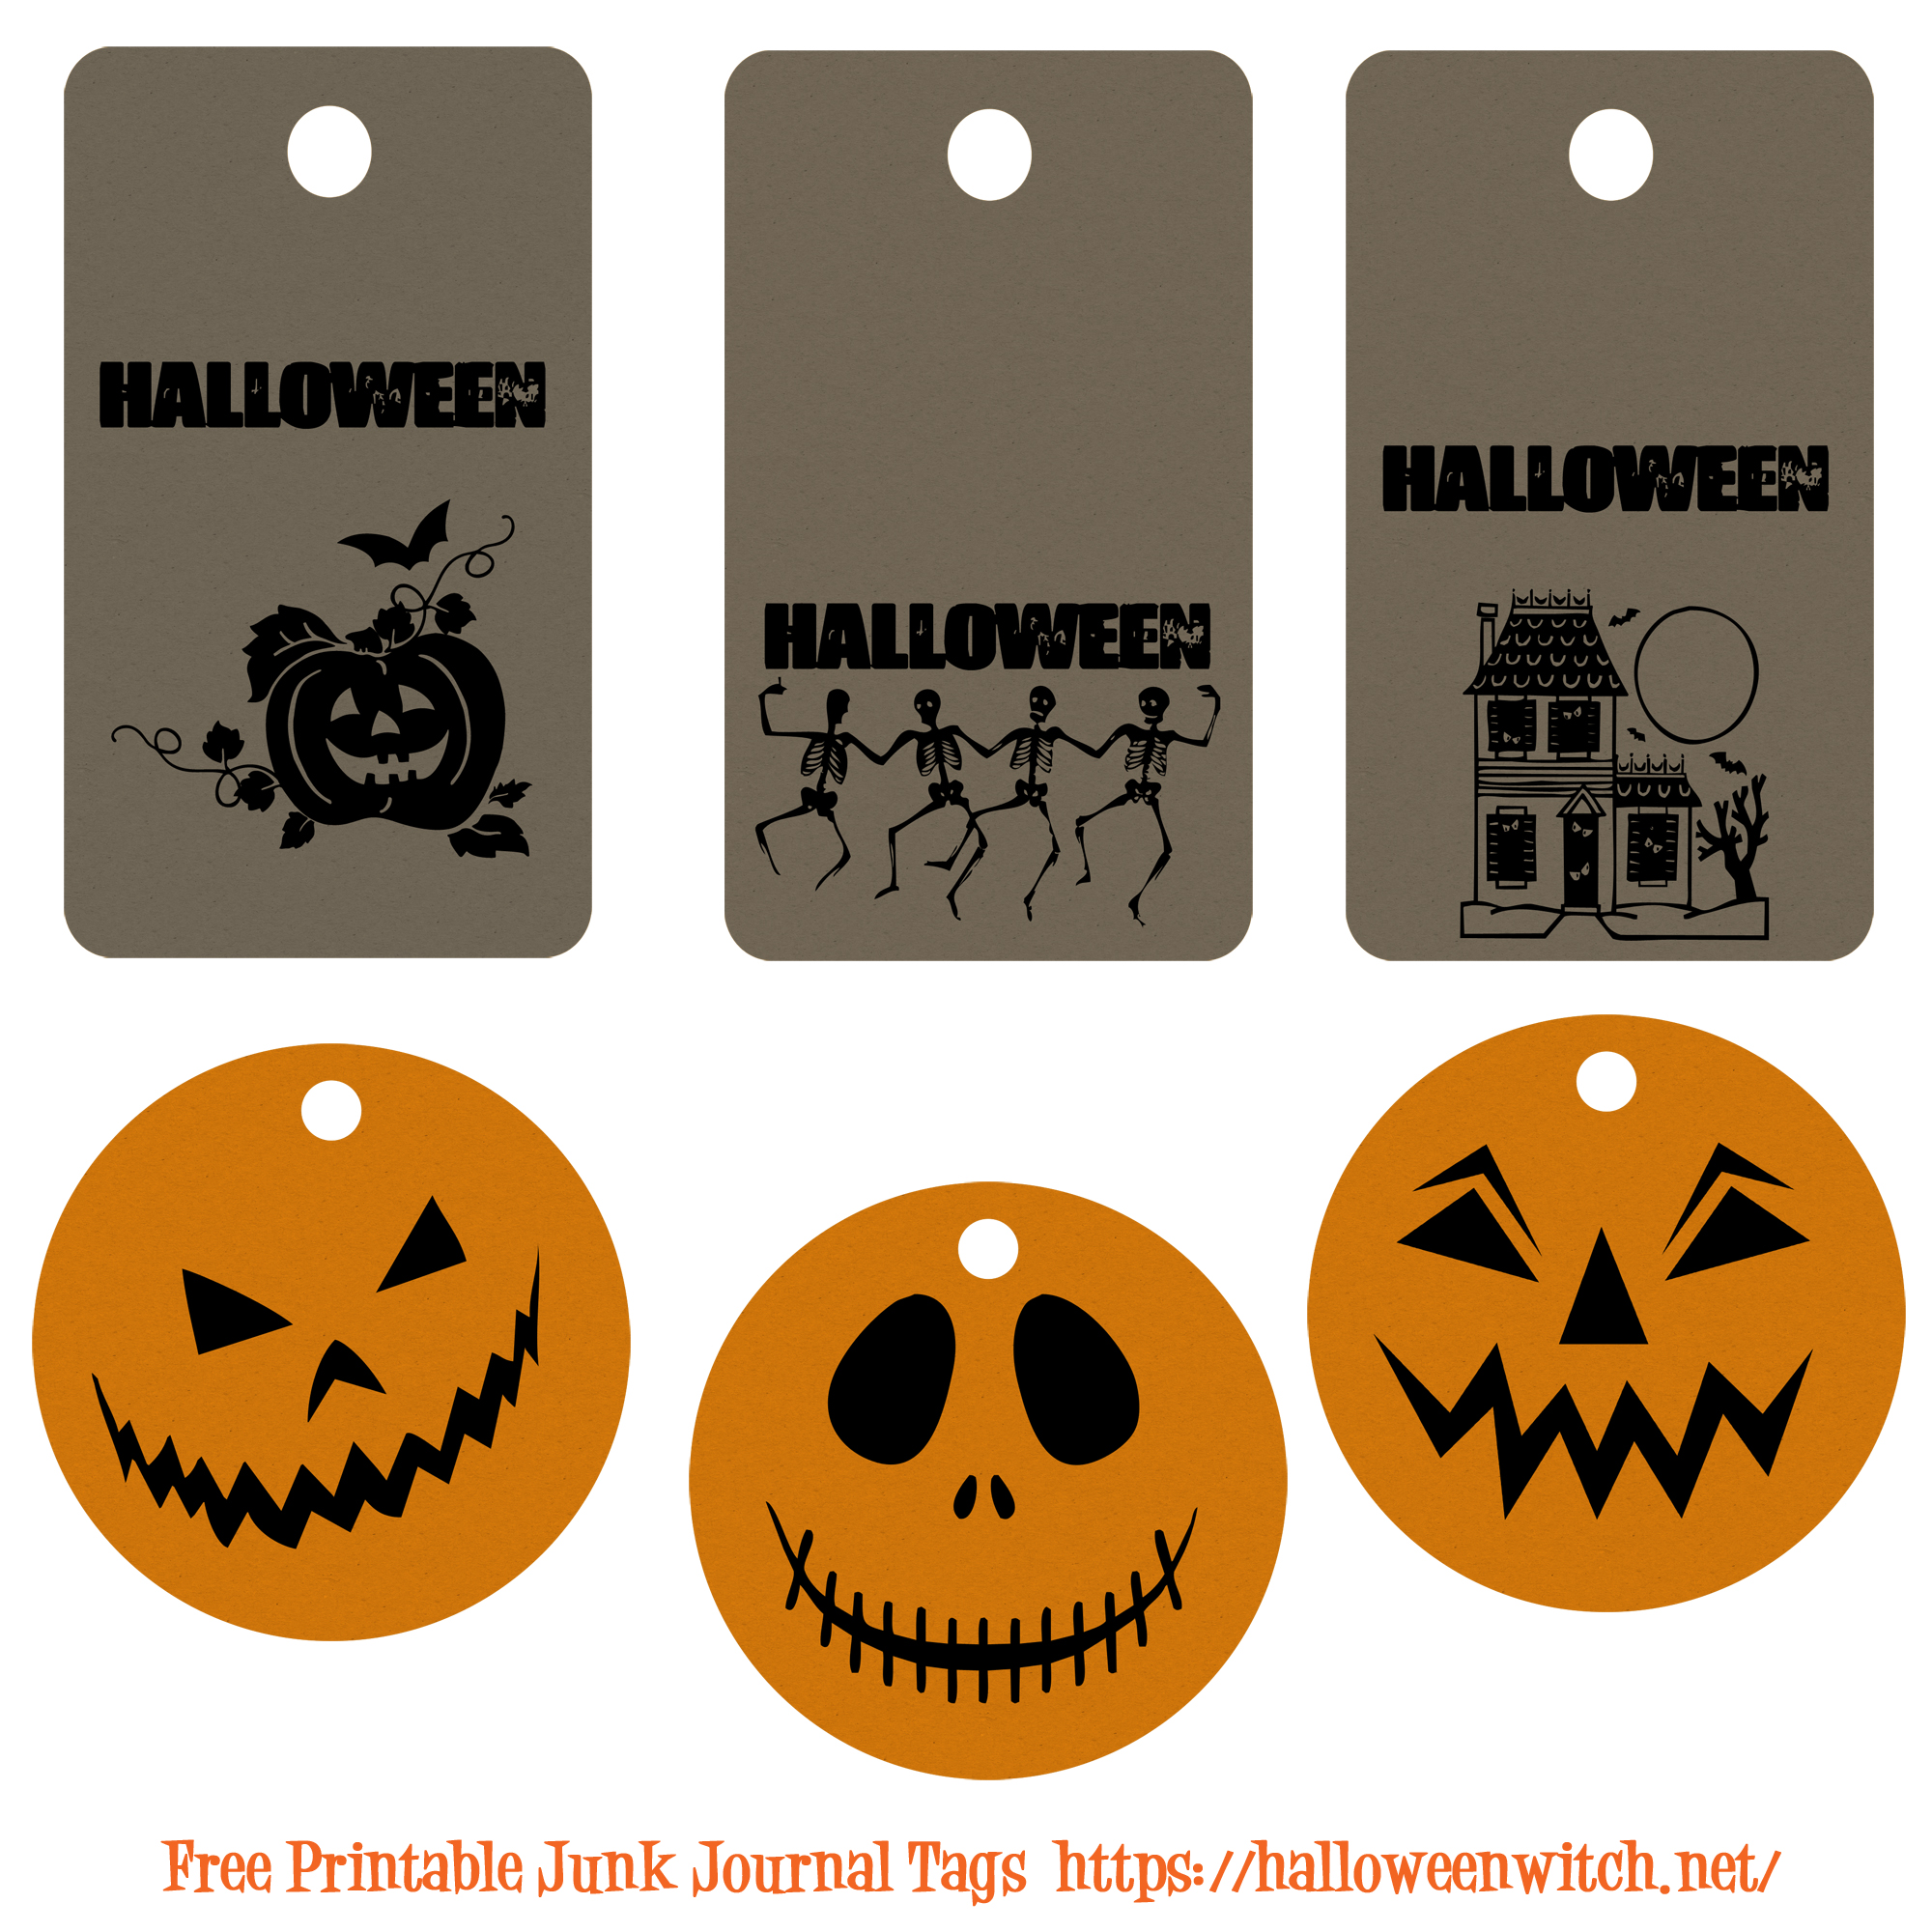 Halloween Junk Journal Tags - Copyright @ Designs by Forte